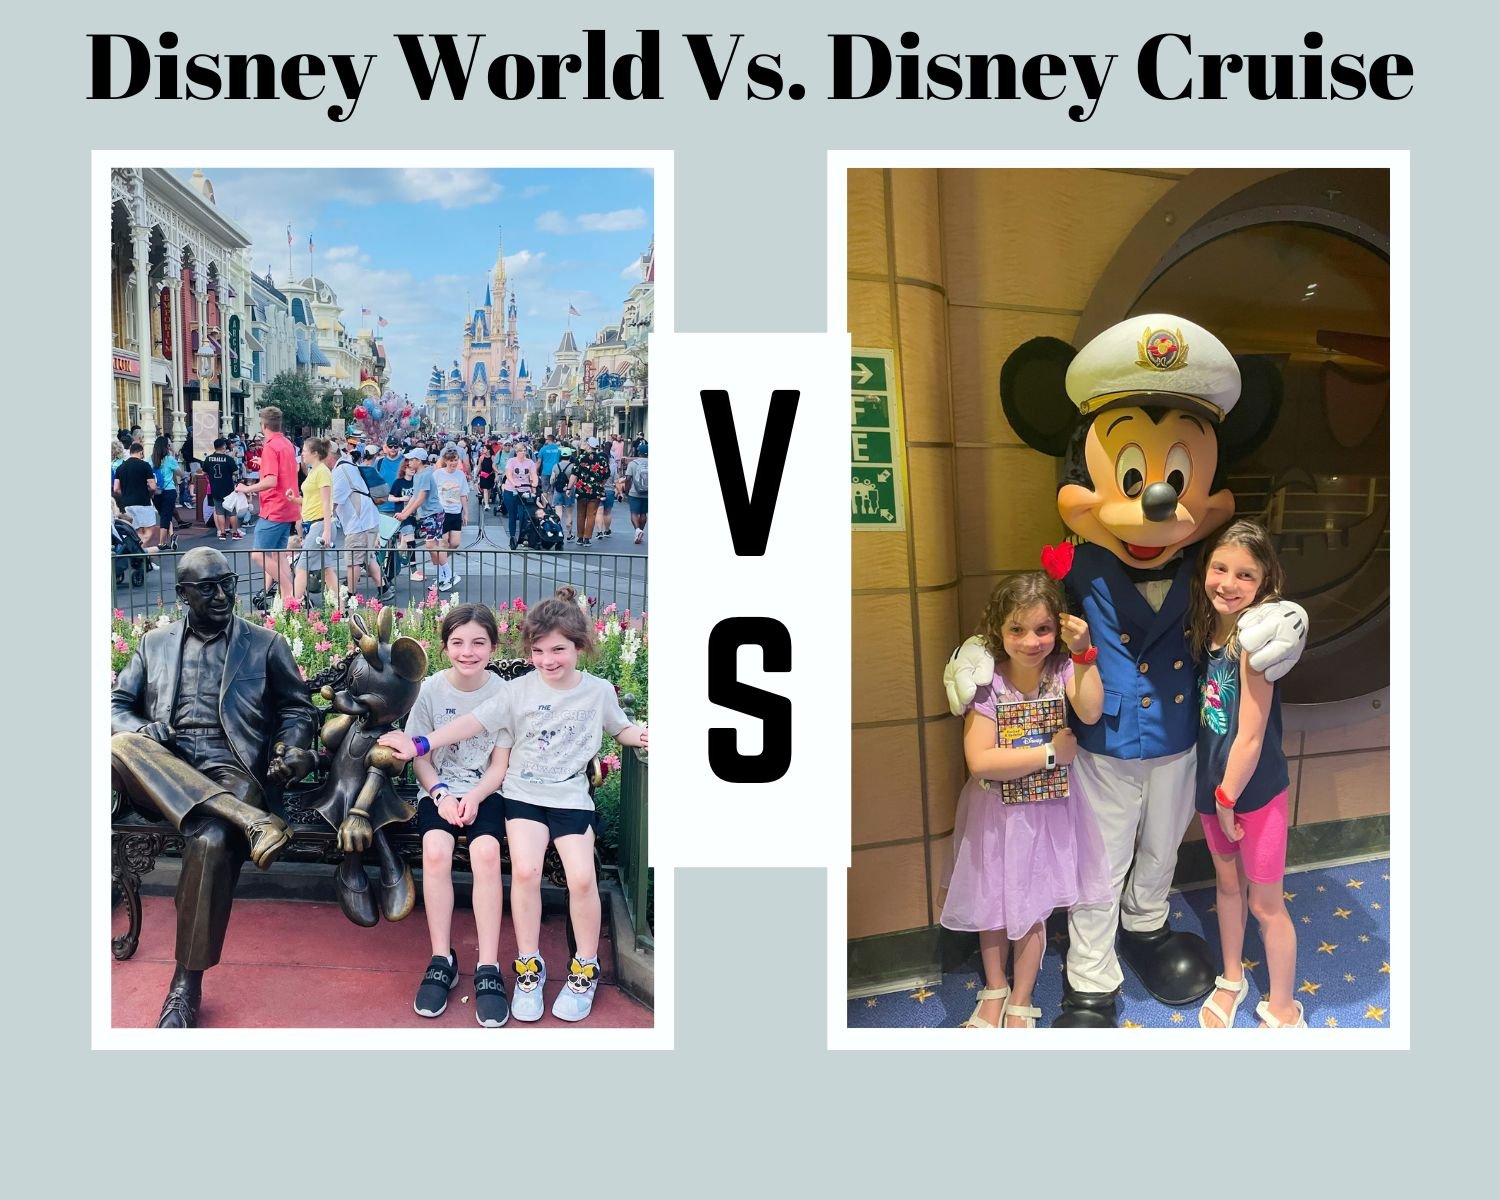 Disney World vs Disney Cruise: Which is a better vacation?